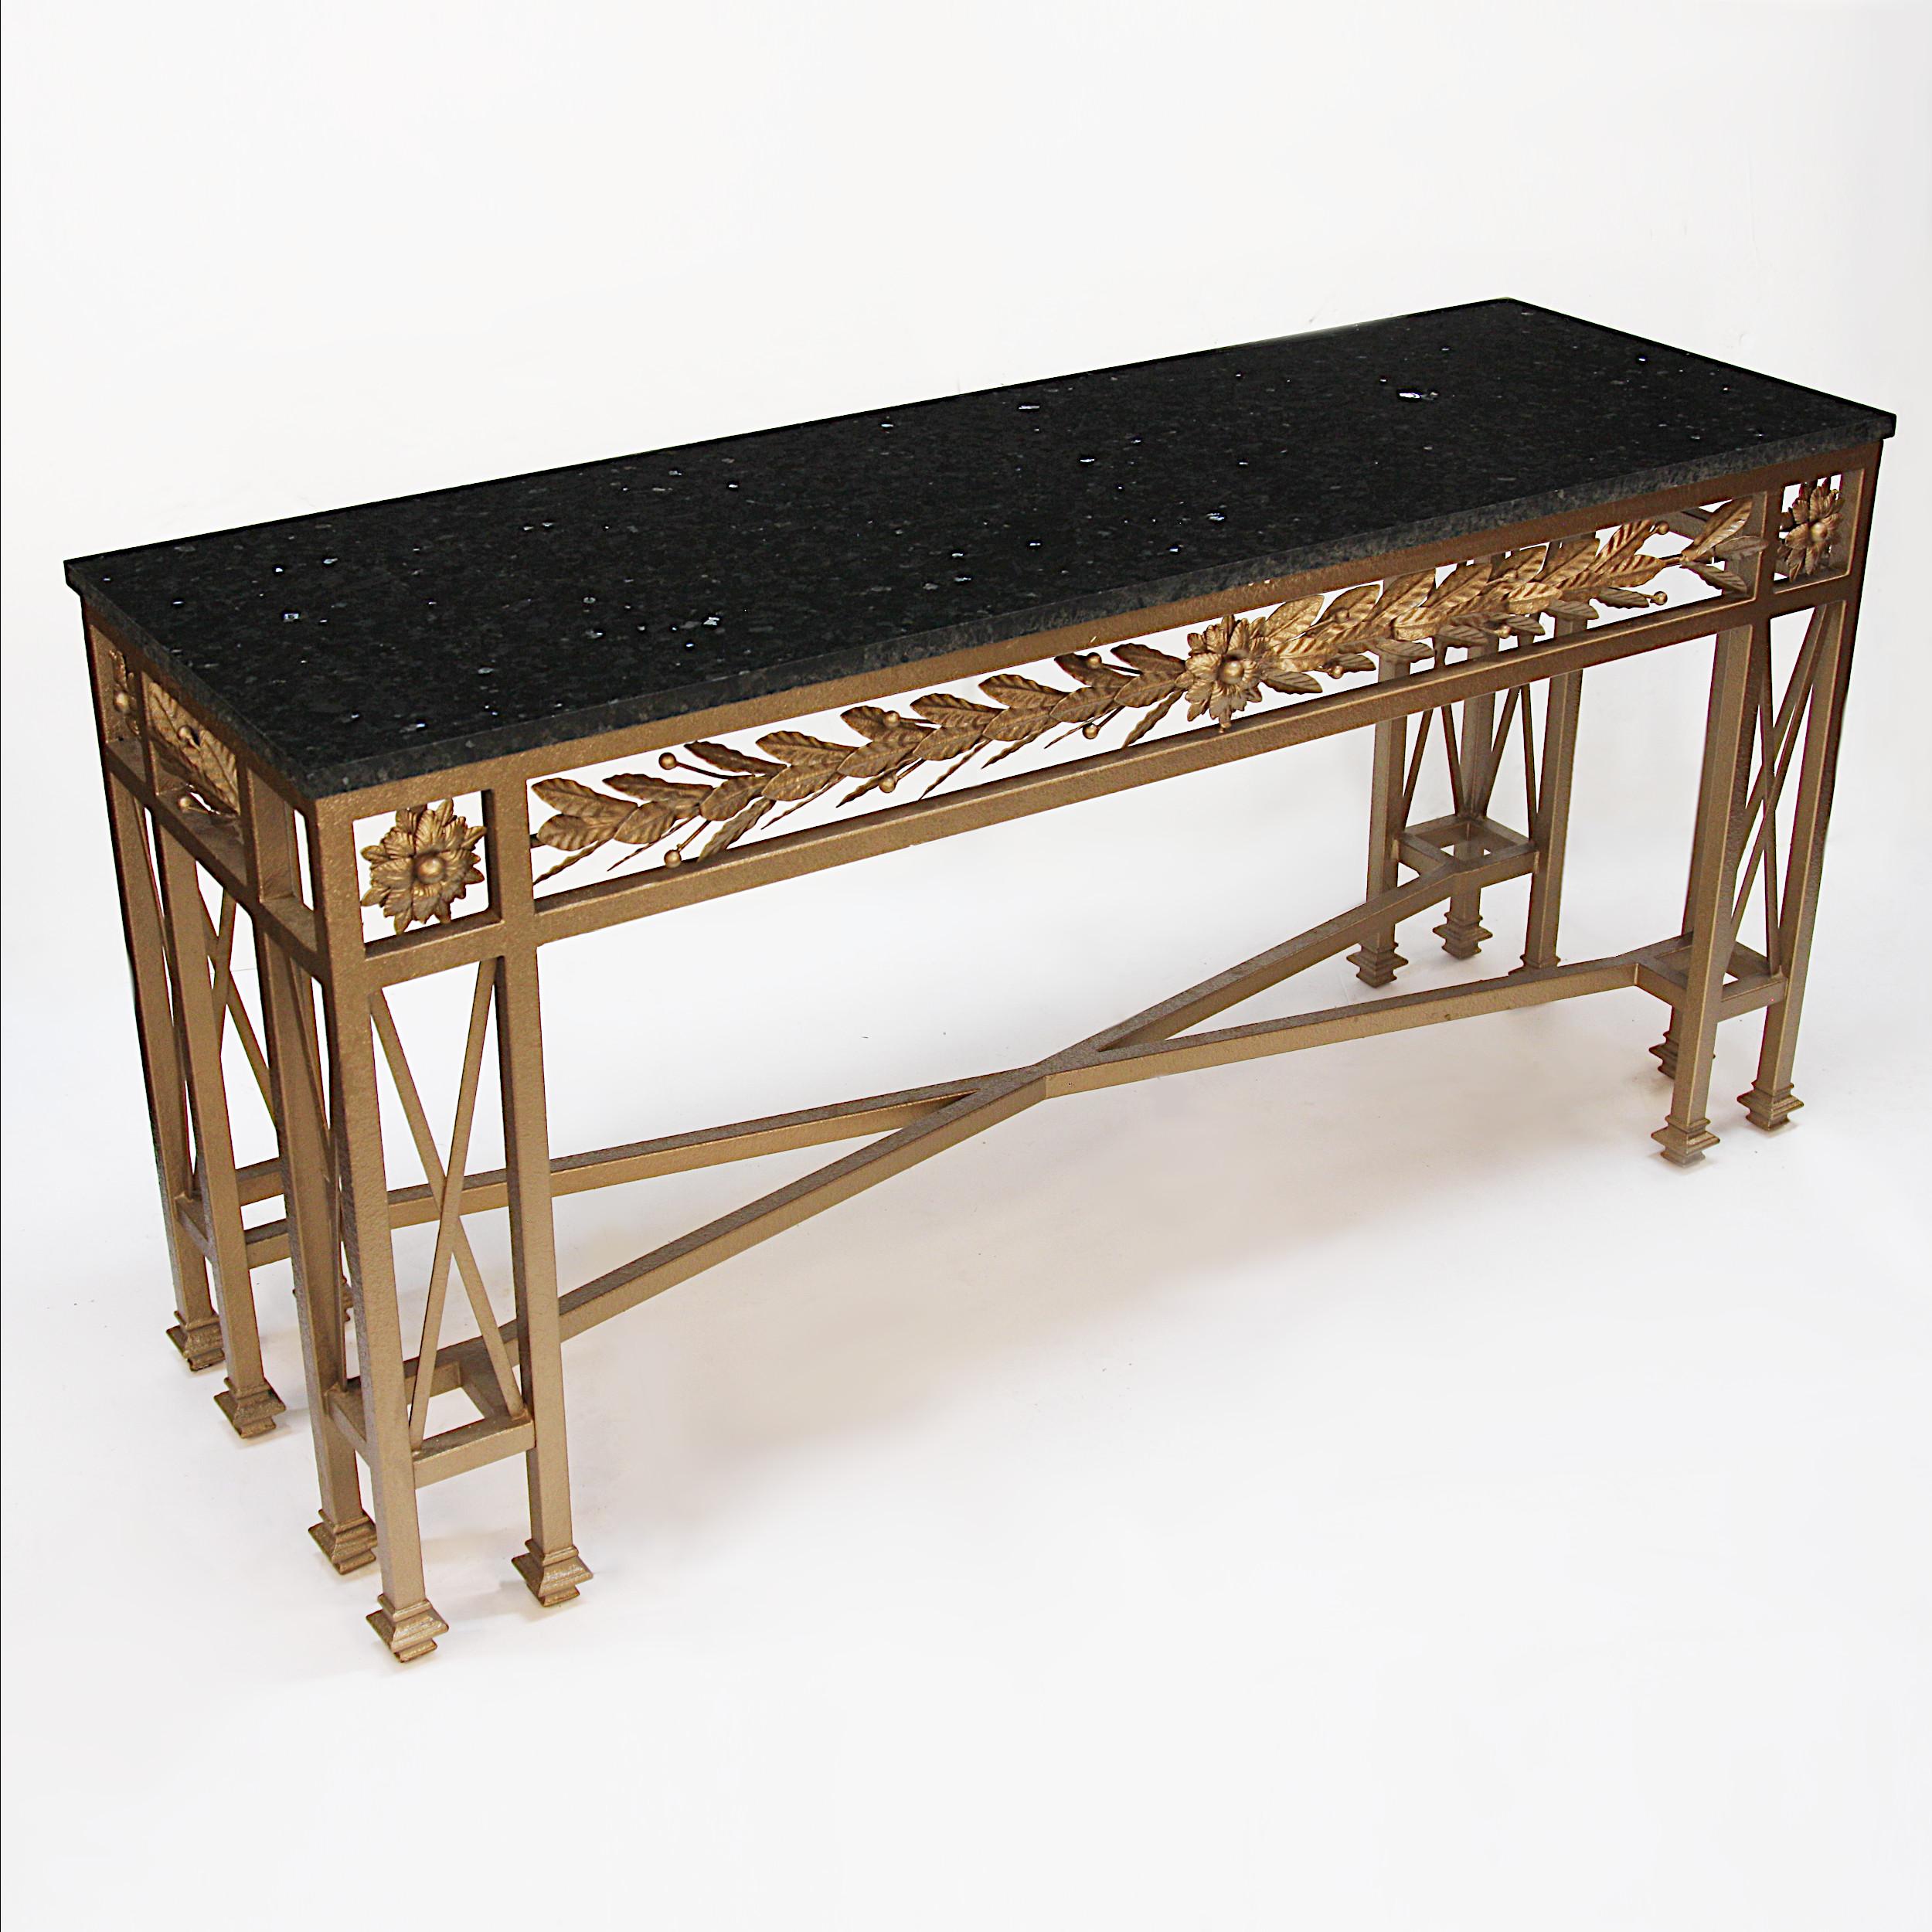 Impressive 1950s era, neoclassical style console table. Table features a heavy wrought iron base with flower and sheaf motifs, gold paint and black marble top. With its grand proportions and classic black and gold color combo, this table would make